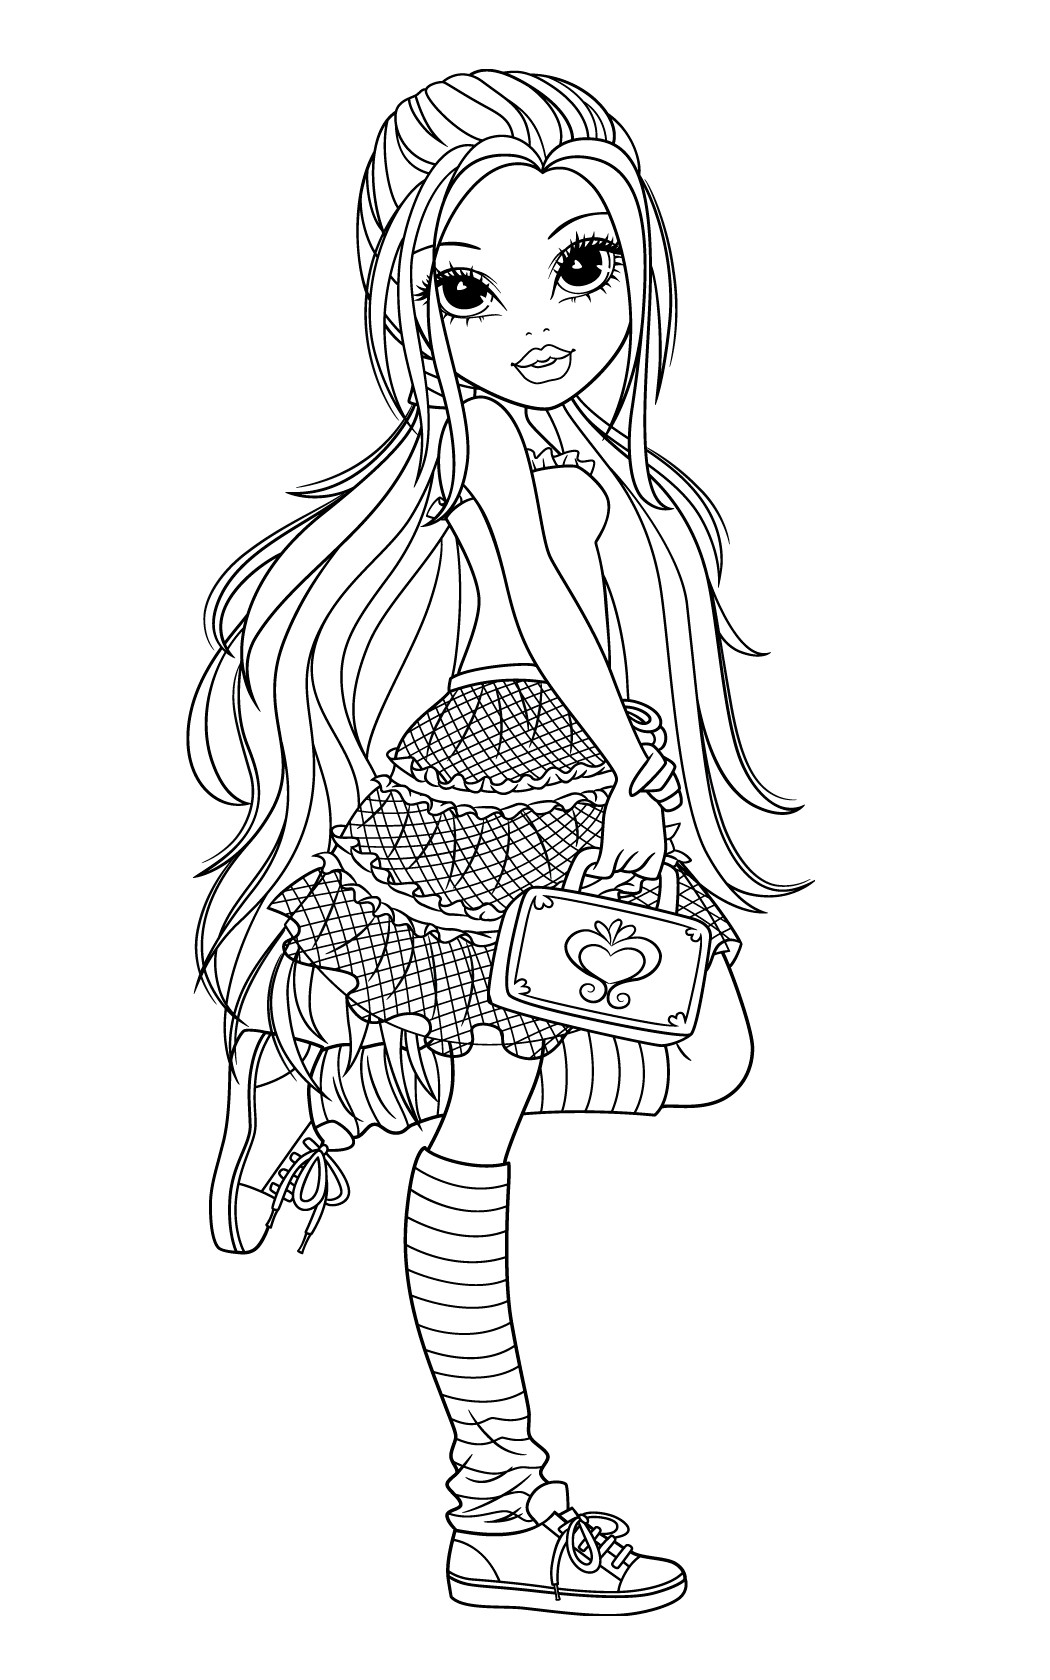 Girls Printable Coloring Pages
 New Moxie Girlz Coloring Pages will be added frequently so